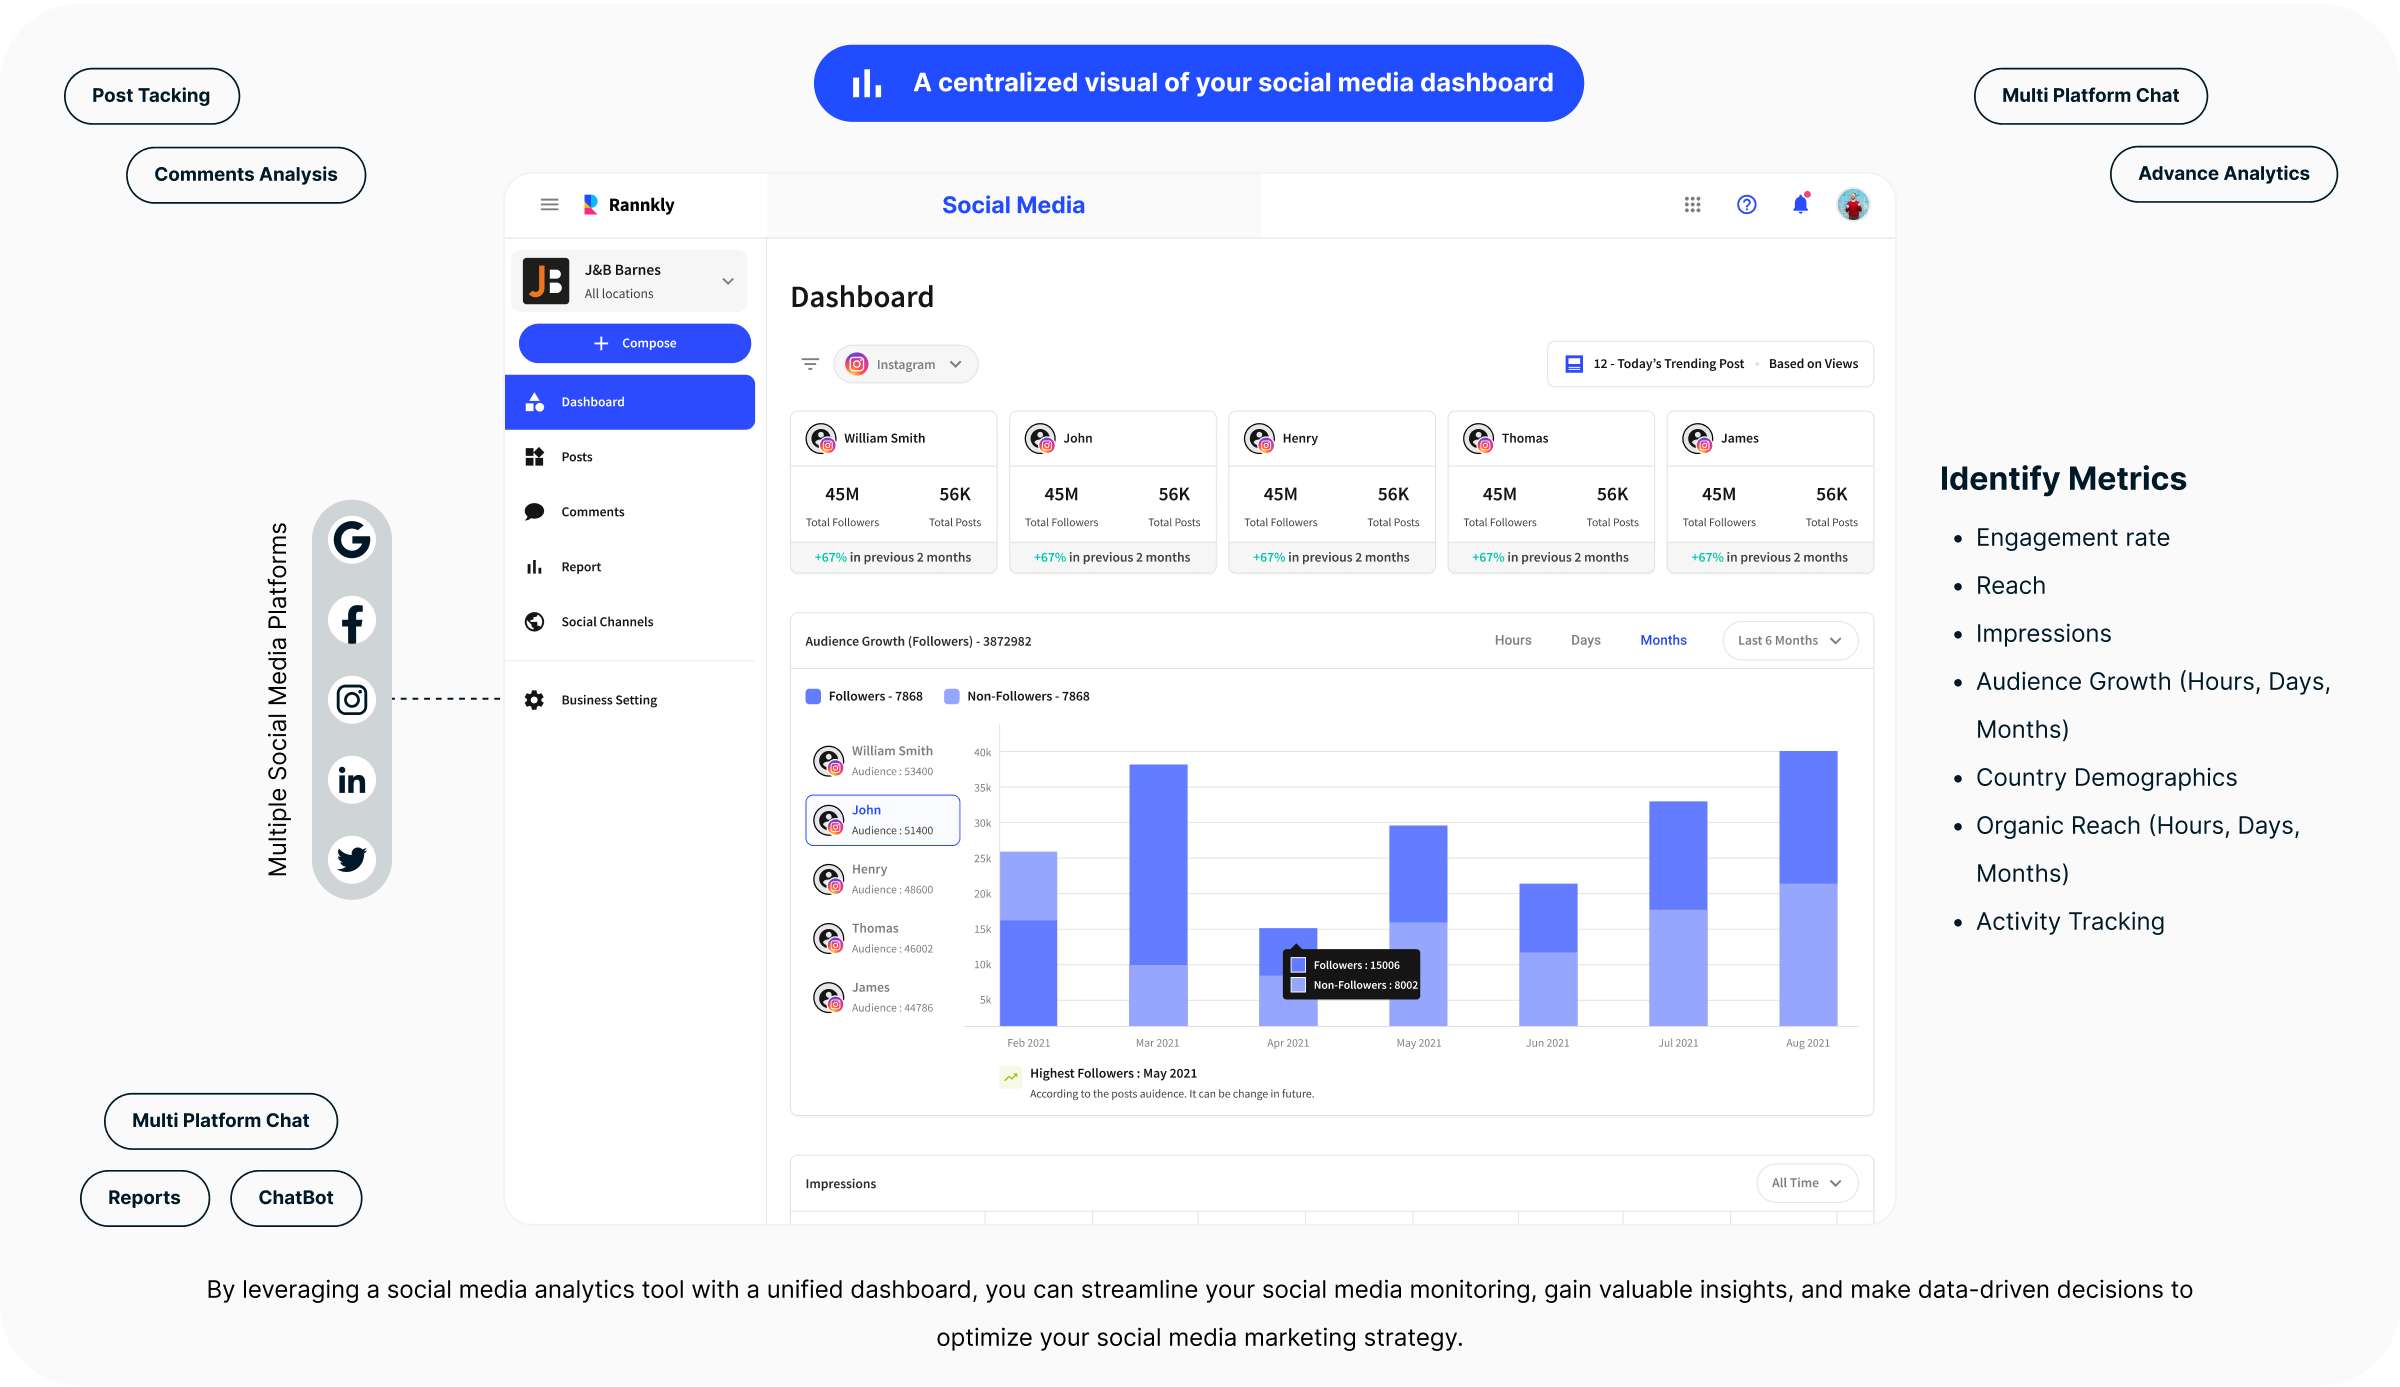 Comprehensive social media dashboard from Rannkly showing metrics for post tracking, comments analysis, multi-platform chat, and advanced analytics to enhance marketing strategies.